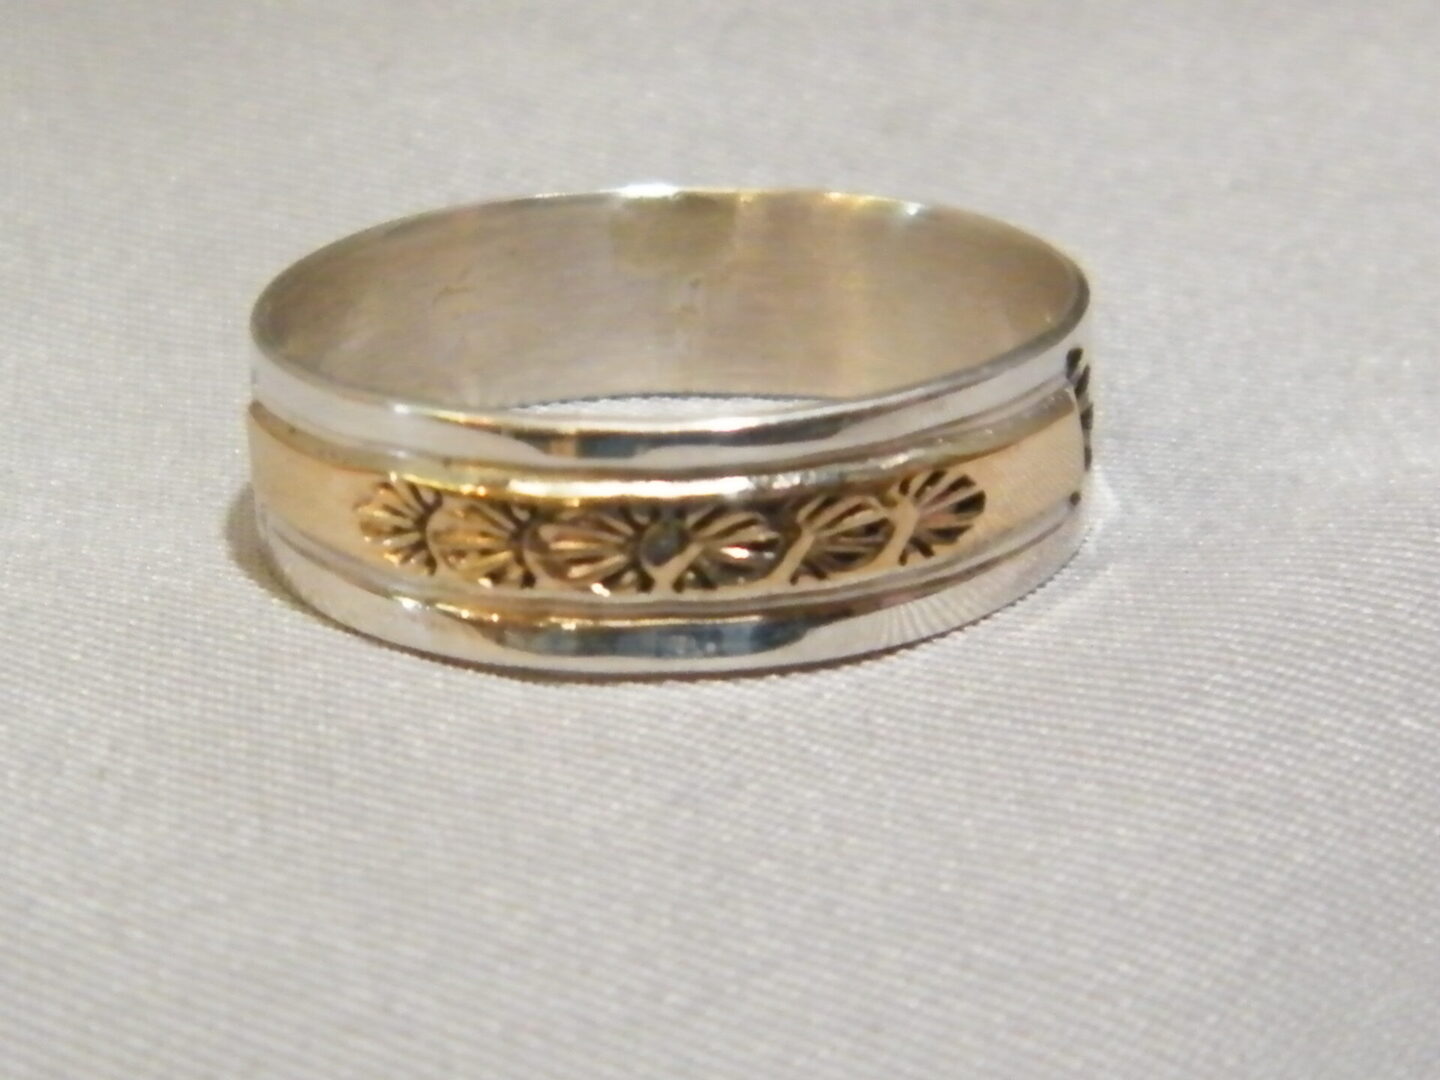 A White Gold Ring With Design in Center